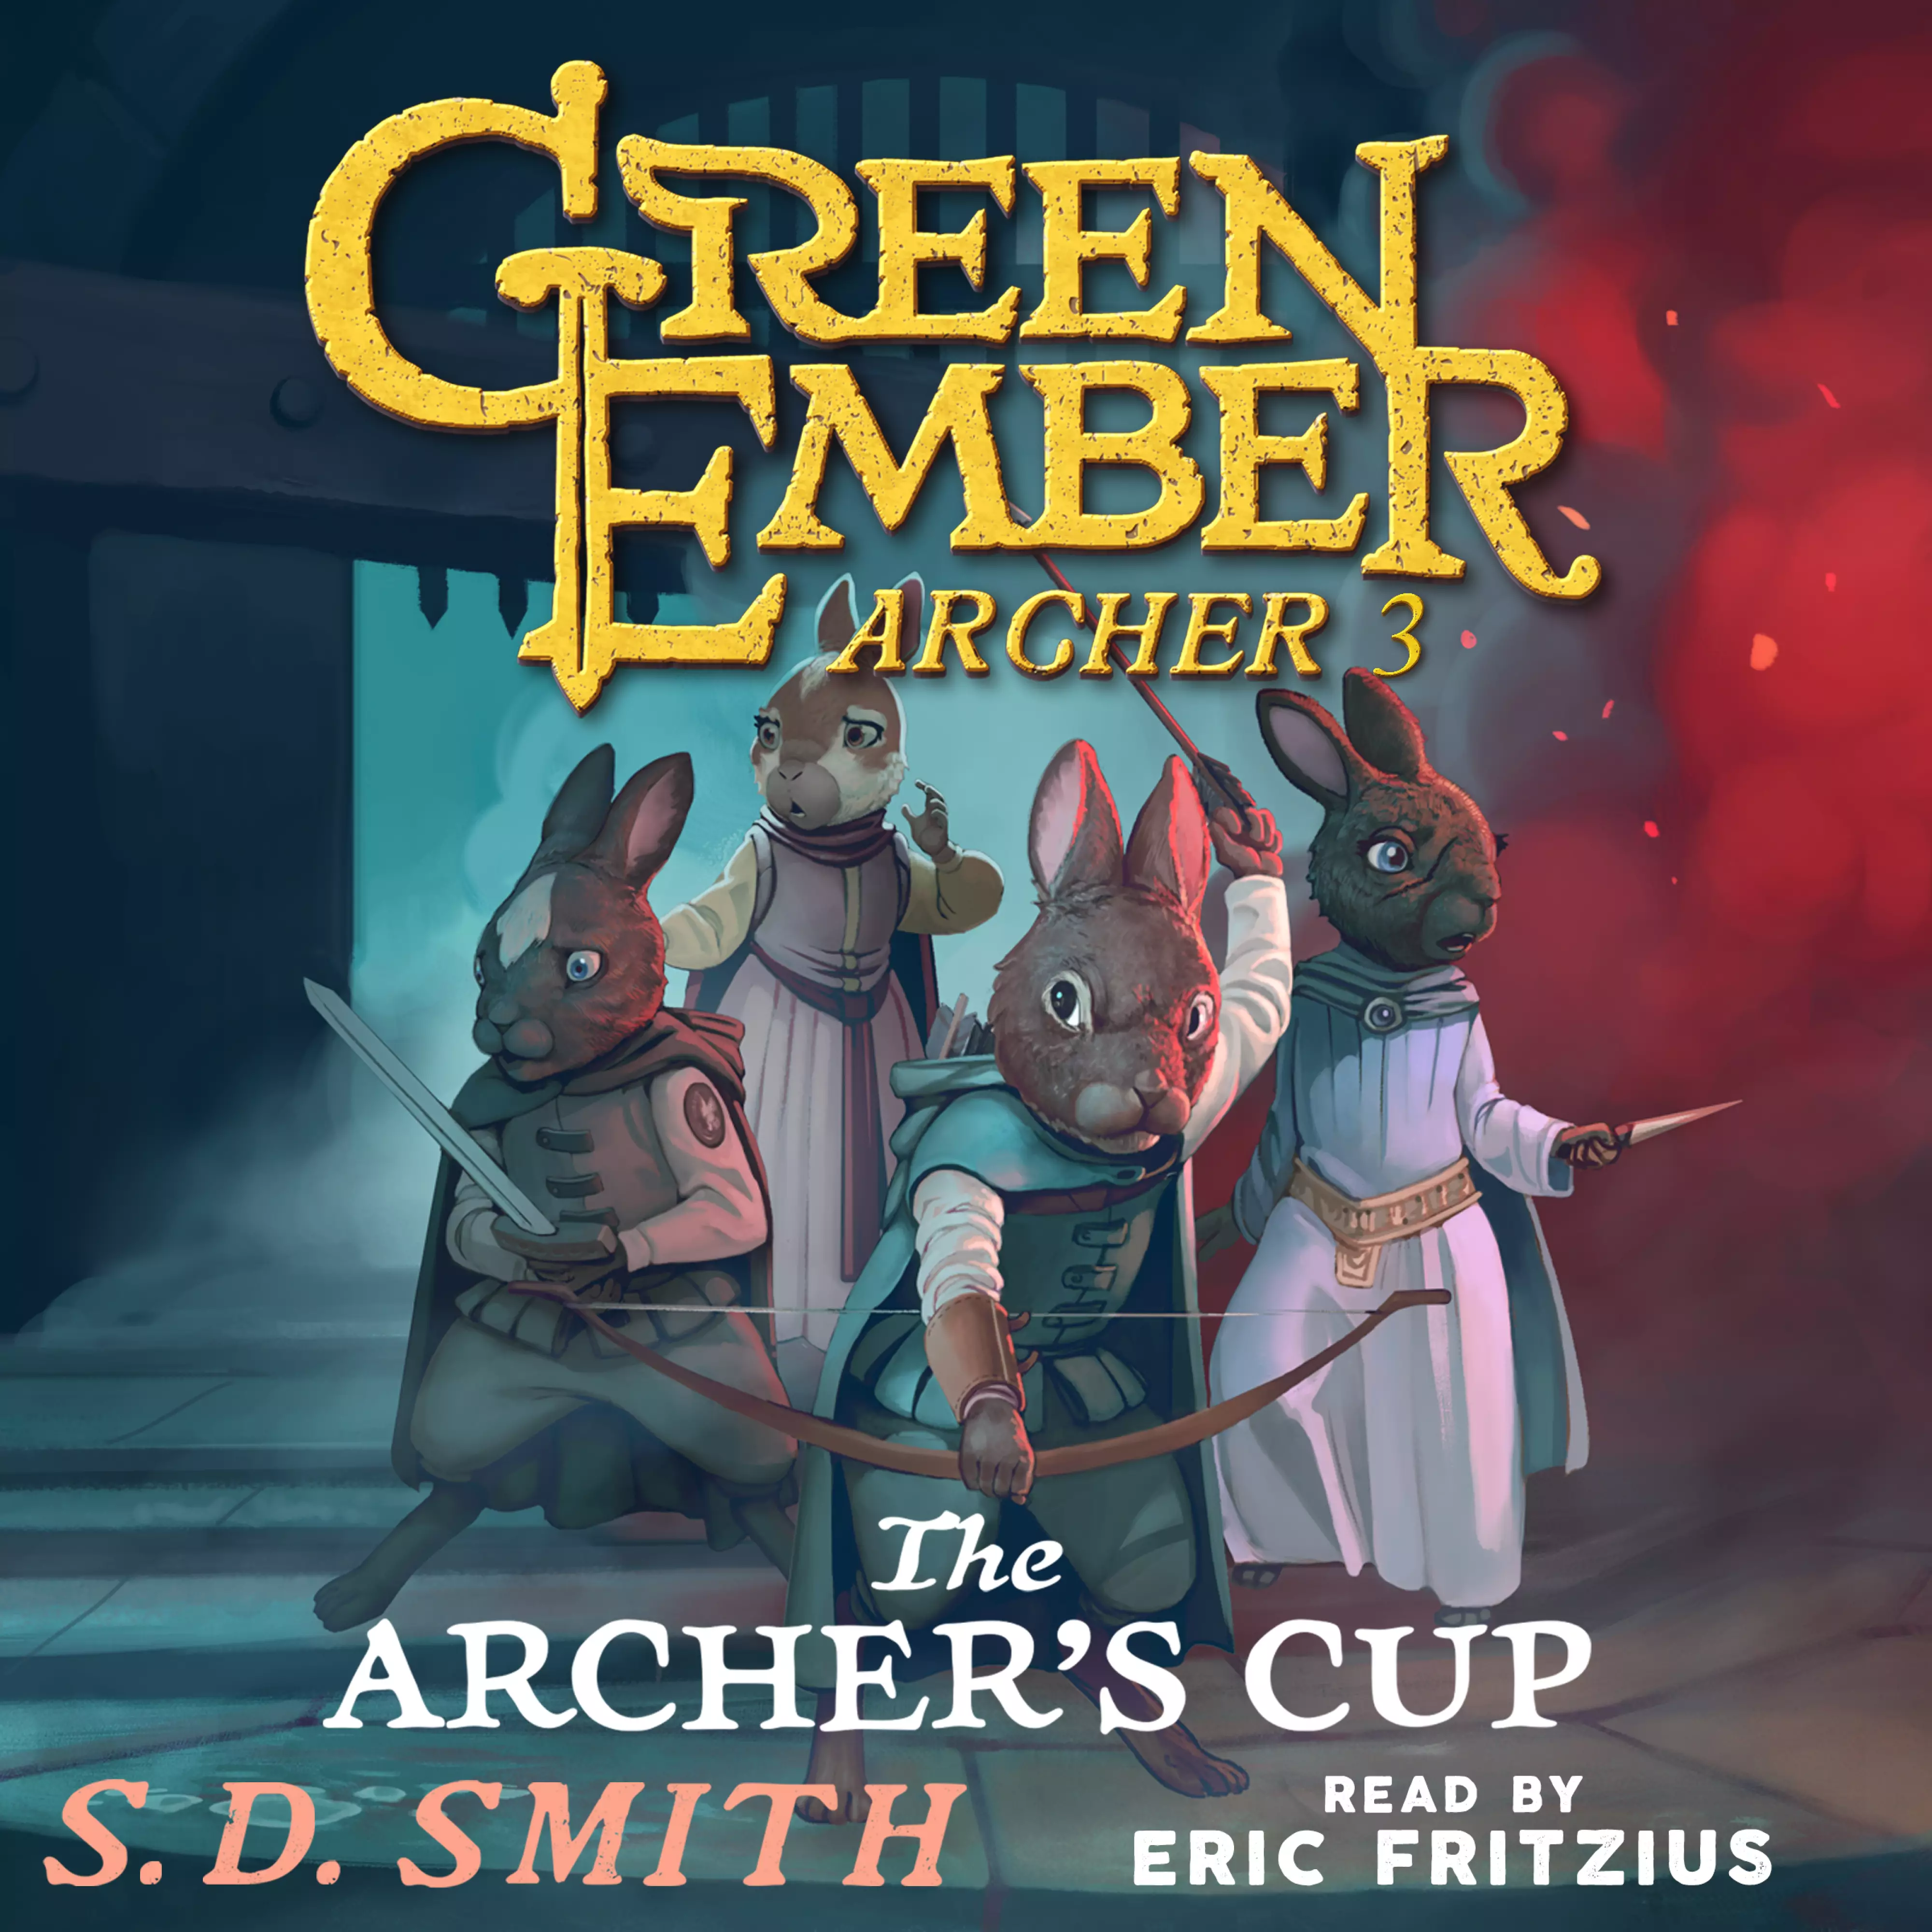 The Archer's Cup